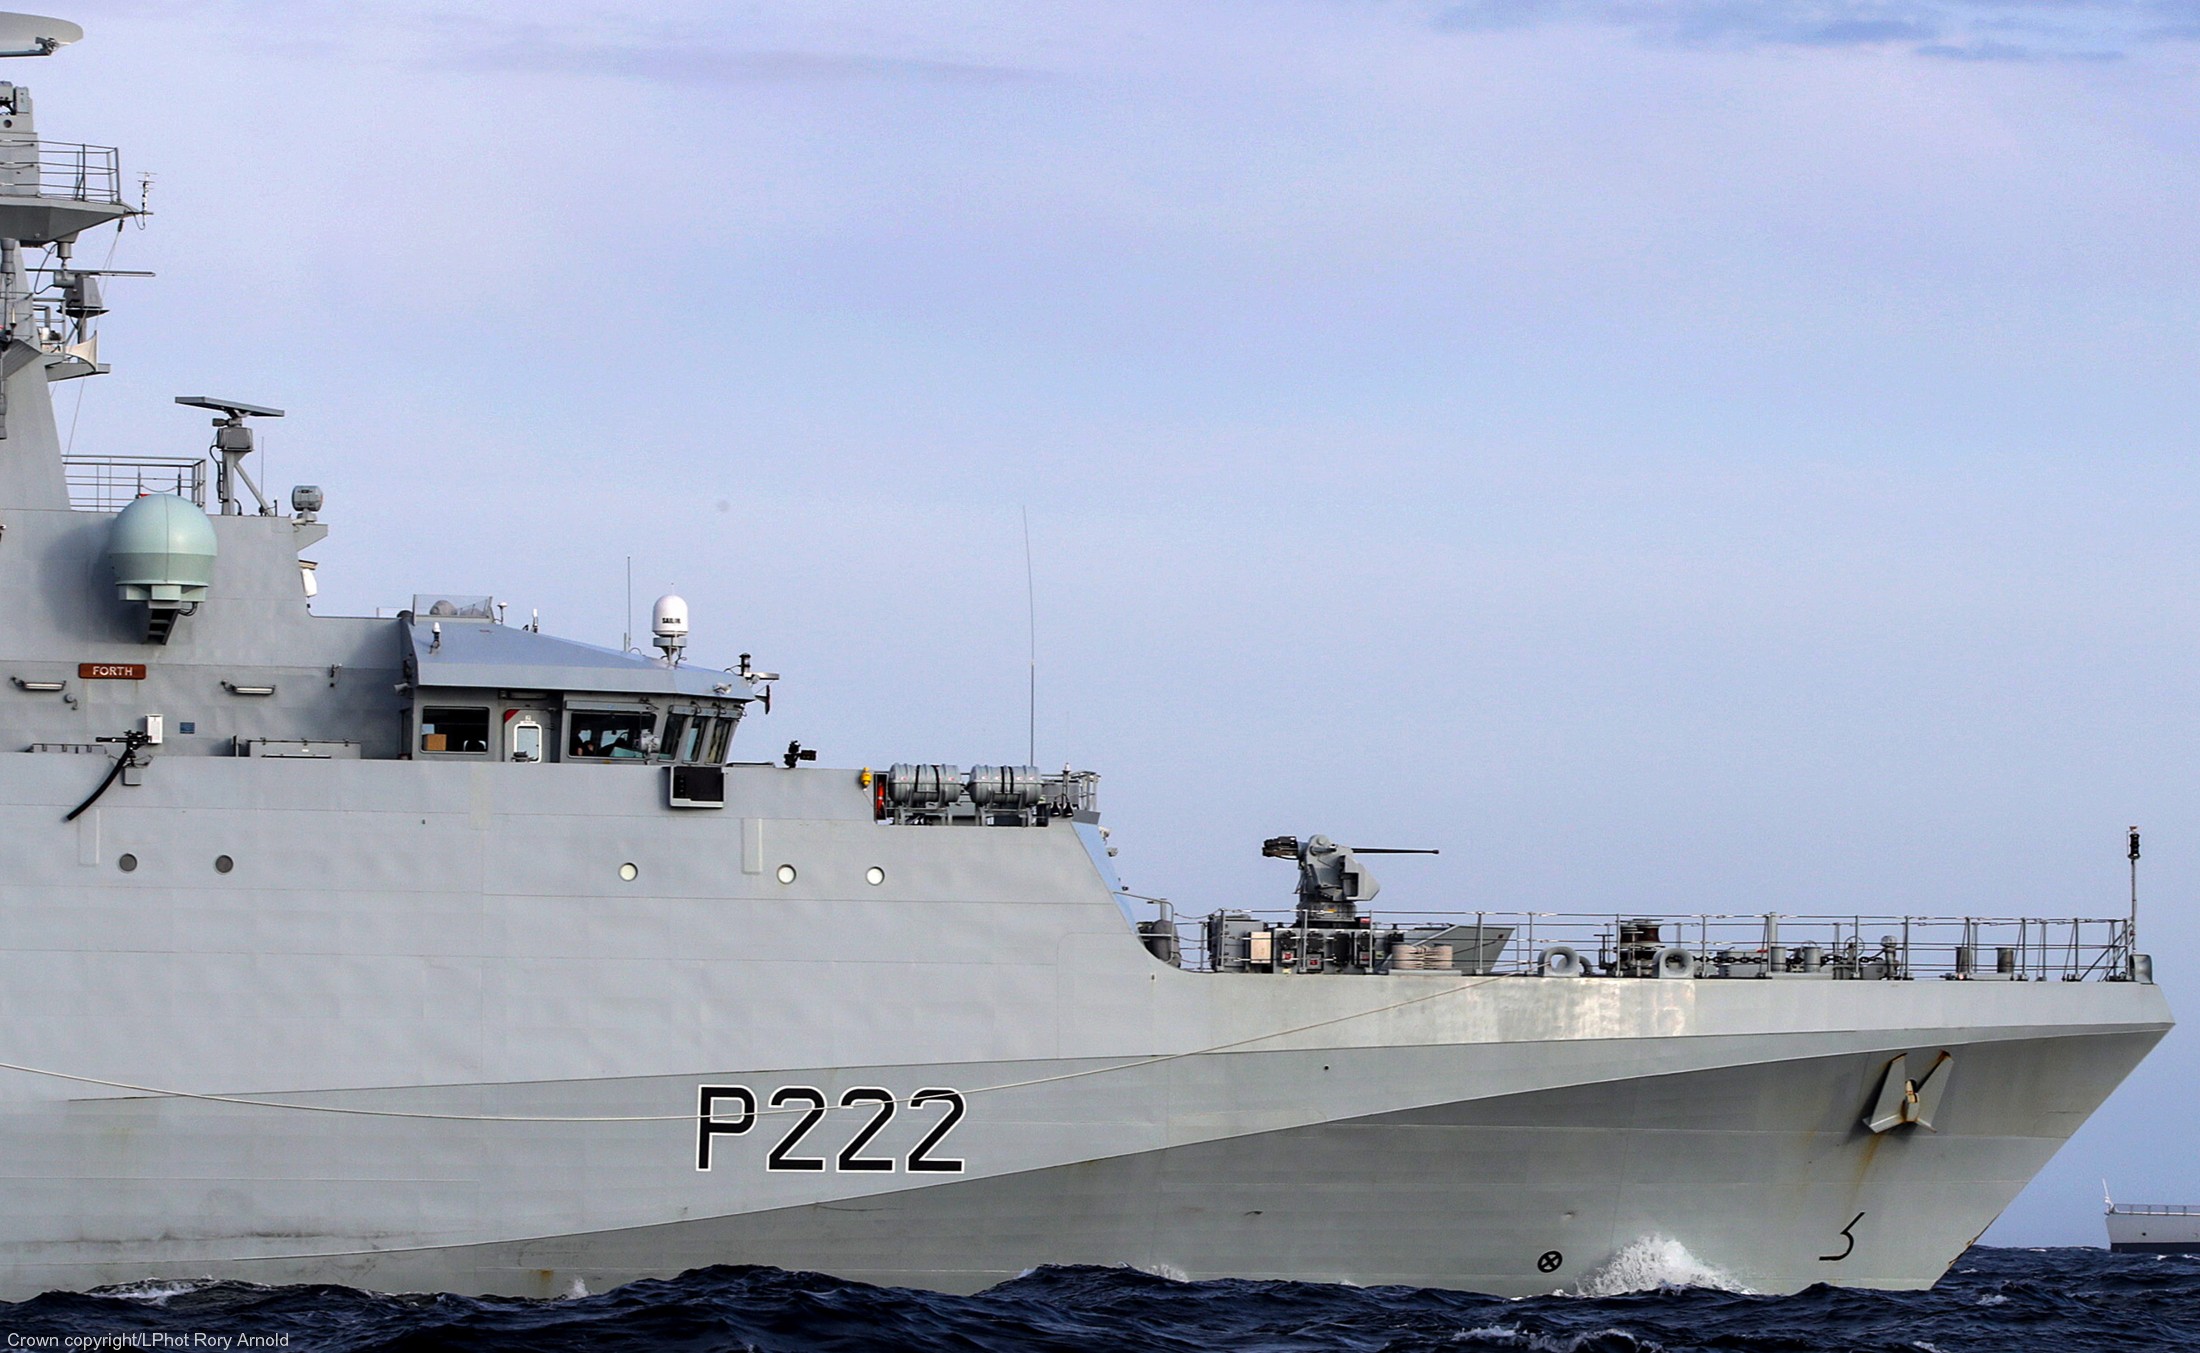 p-222 hms forth river class offshore patrol vessel opv royal navy 12